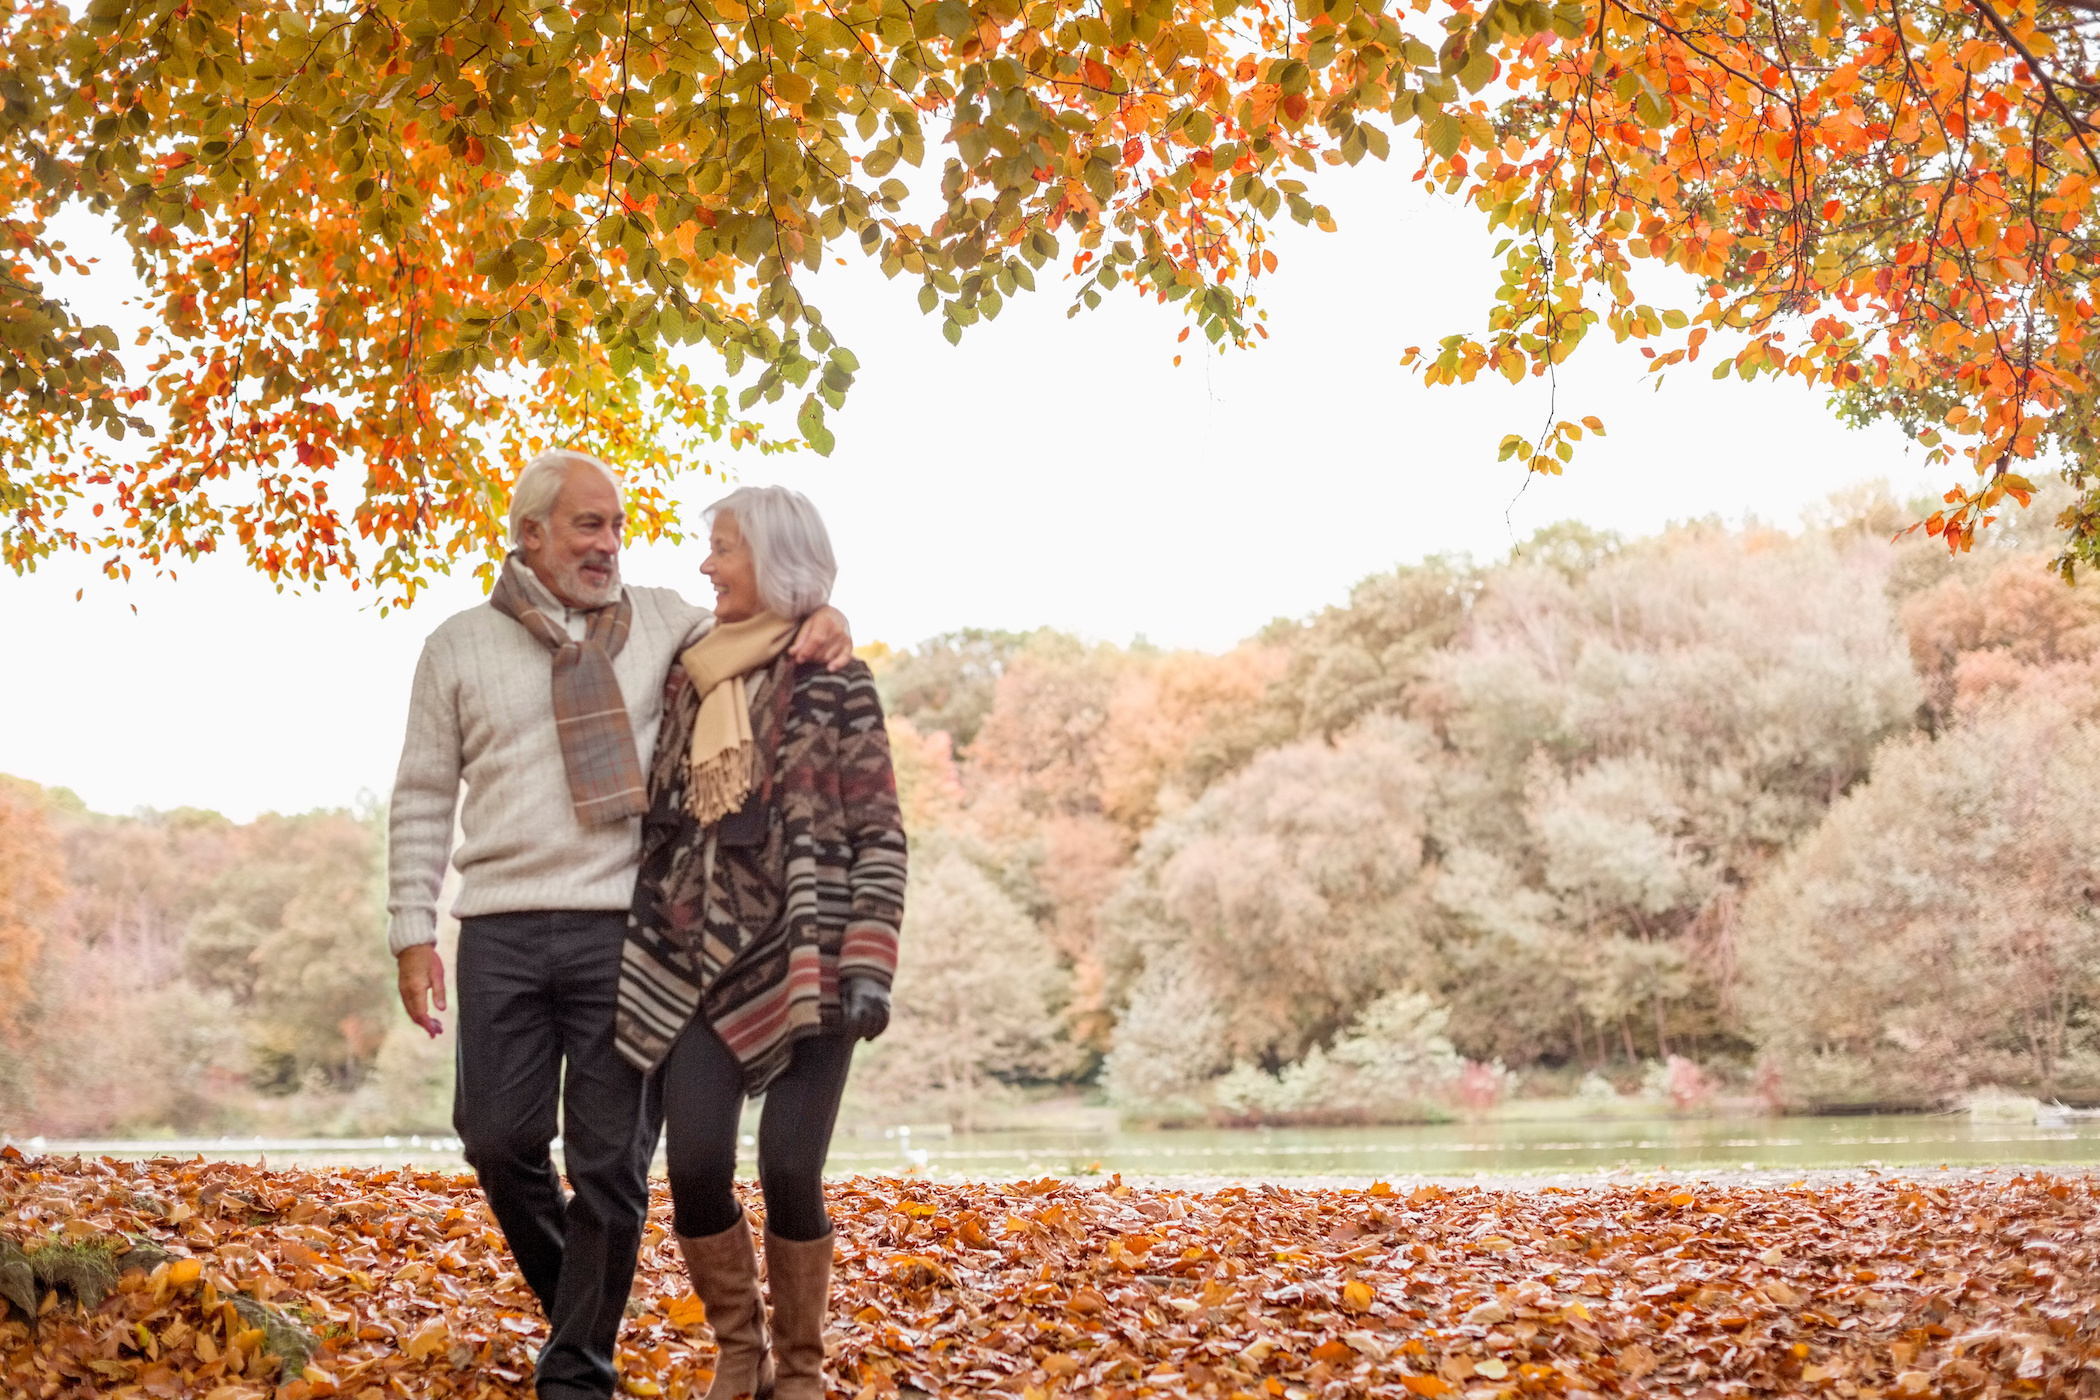 A man and woman enjoy fall foliage after a business trip to the Northeast U.S. The non-business portion of business travel expenses may be viewed as taxable income if paid by the individual or company.